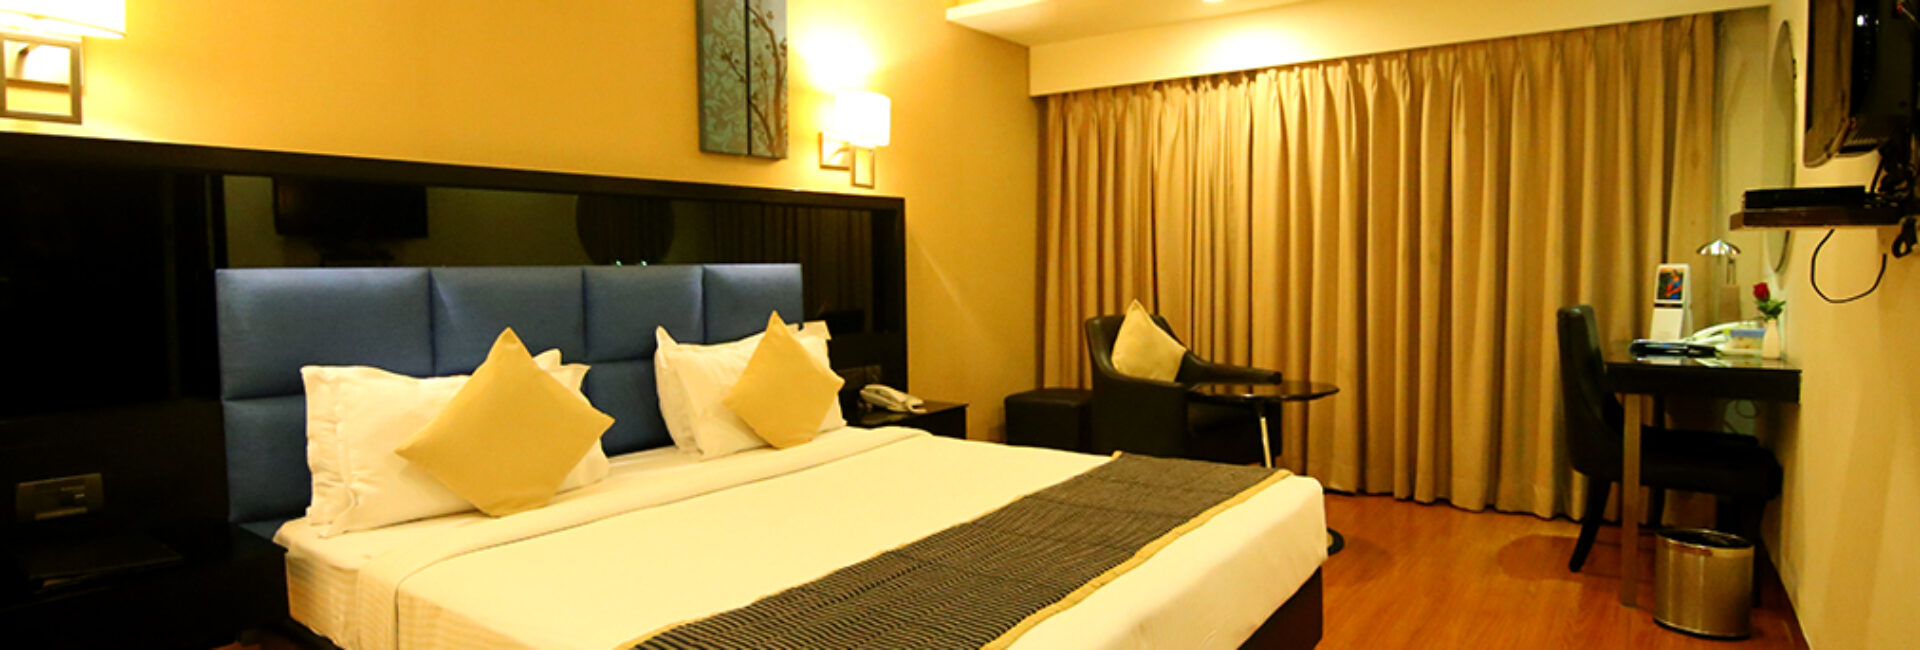 Suite Room – Double Occupancy